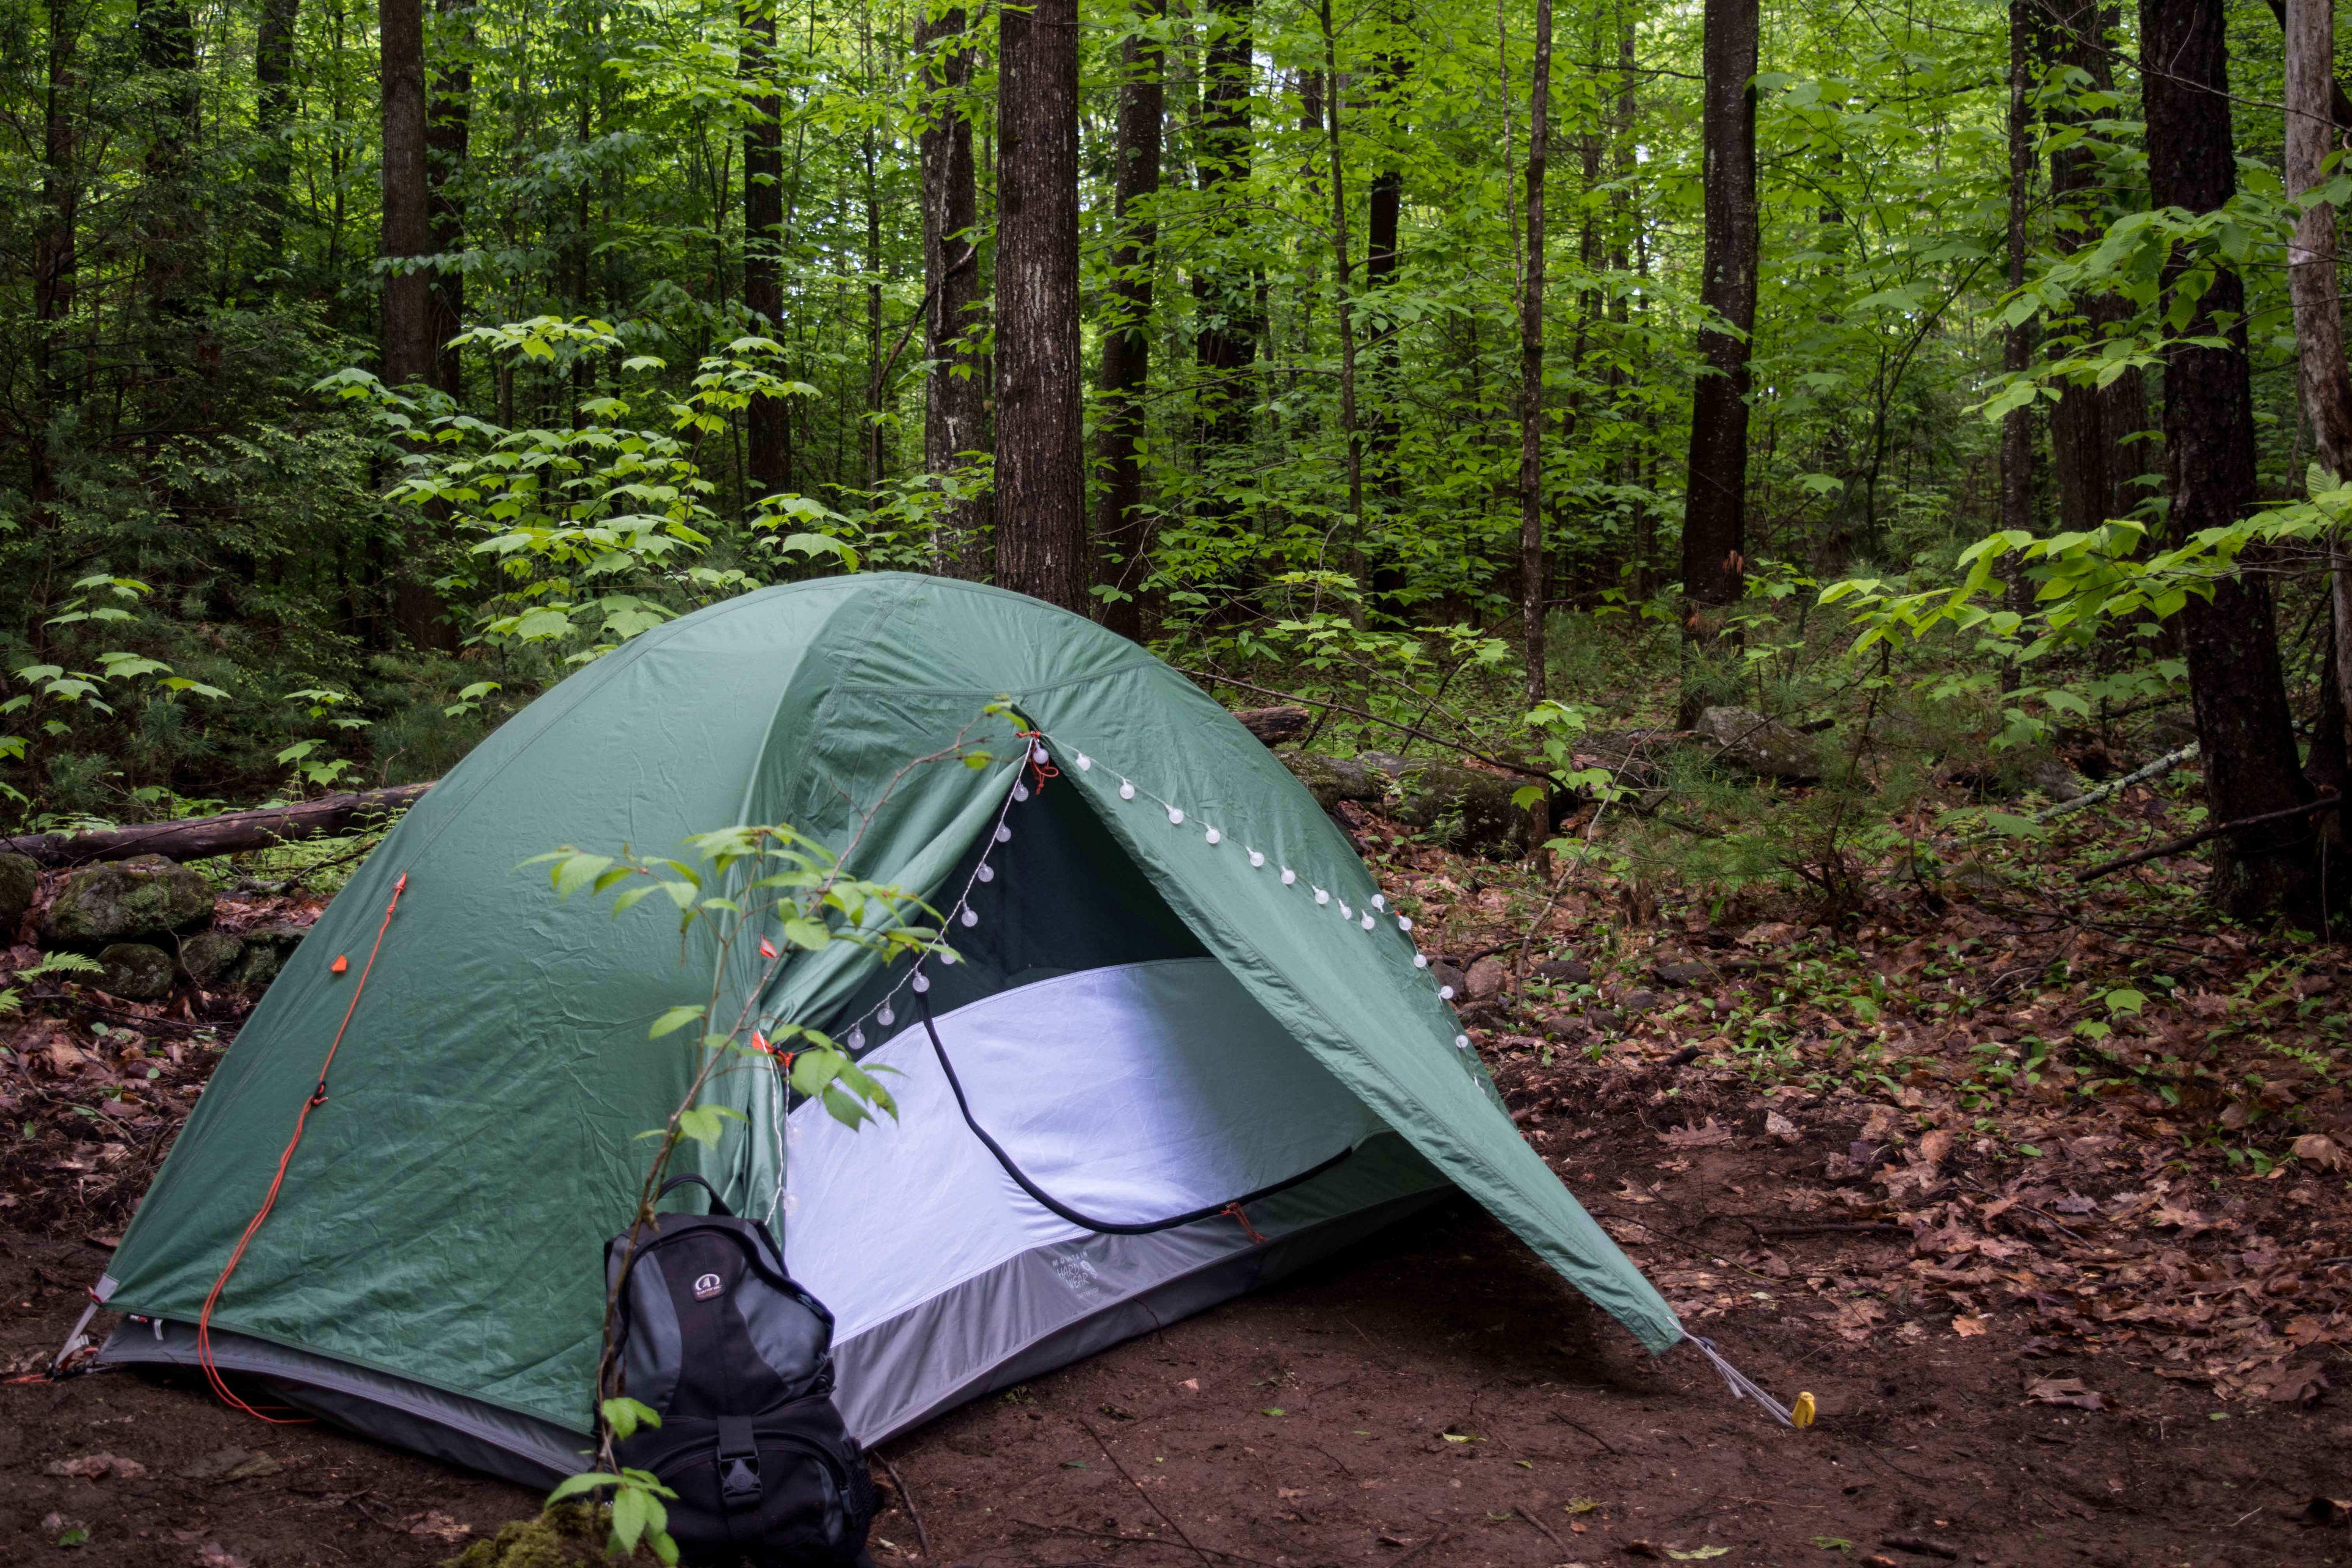 The tent site in the forest